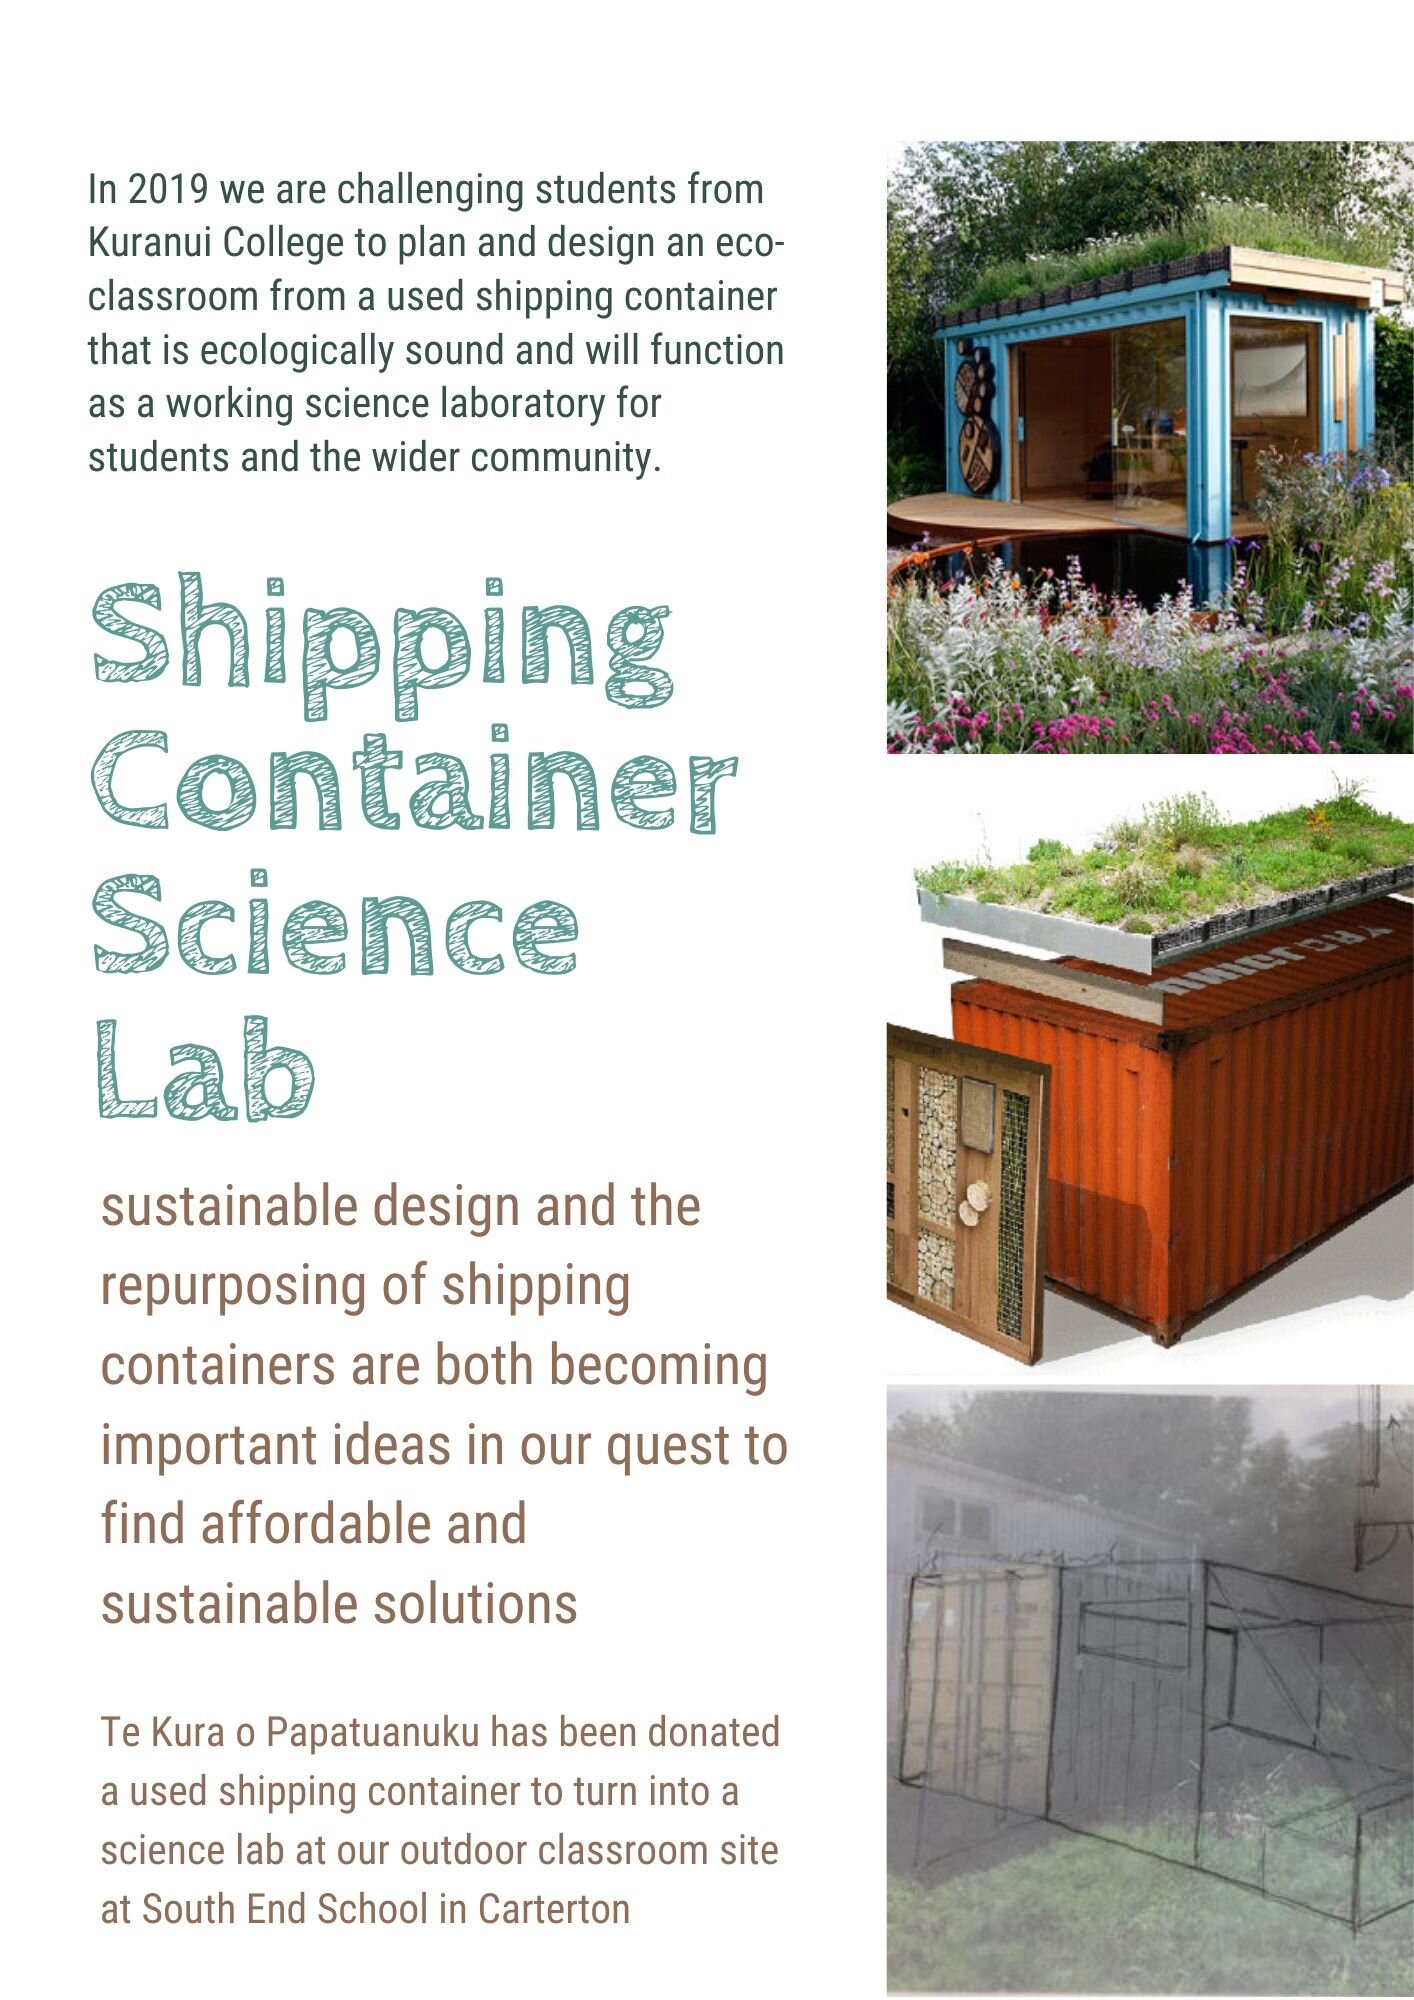 in 2019 we are challenging students from kuranui college to plan and design an eco-classroom from a used shipping container that is ecologically sound and will function as a working science laboratory for students an.jpg